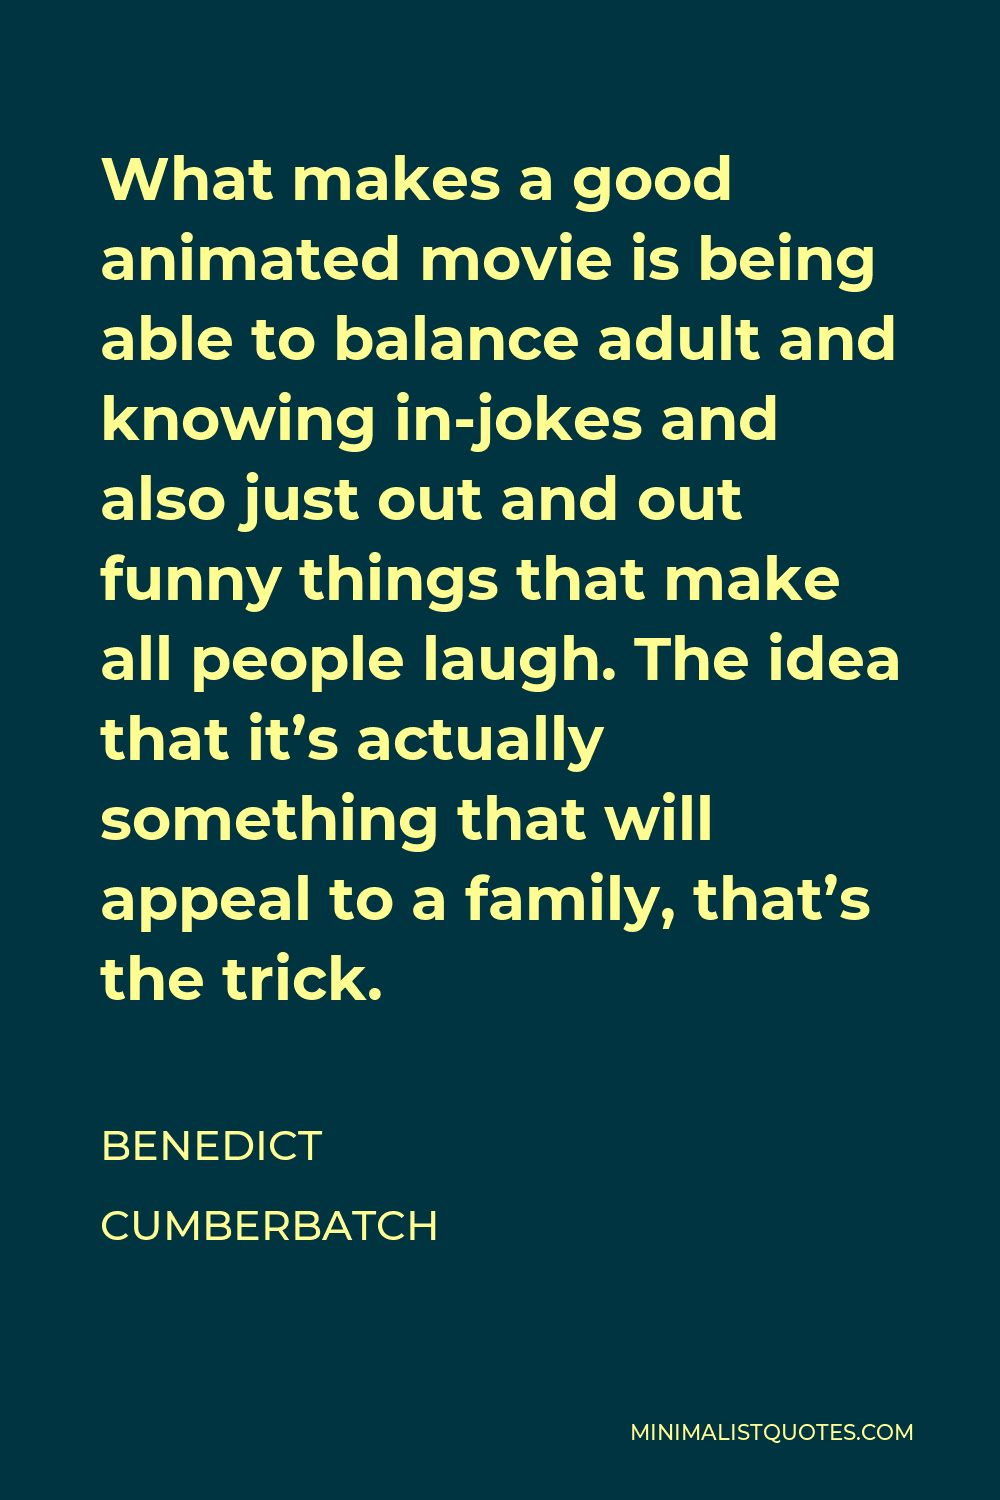 Benedict Cumberbatch Quote - What makes a good animated movie is being able to balance adult and knowing in-jokes and also just out and out funny things that make all people laugh. The idea that it’s actually something that will appeal to a family, that’s the trick.